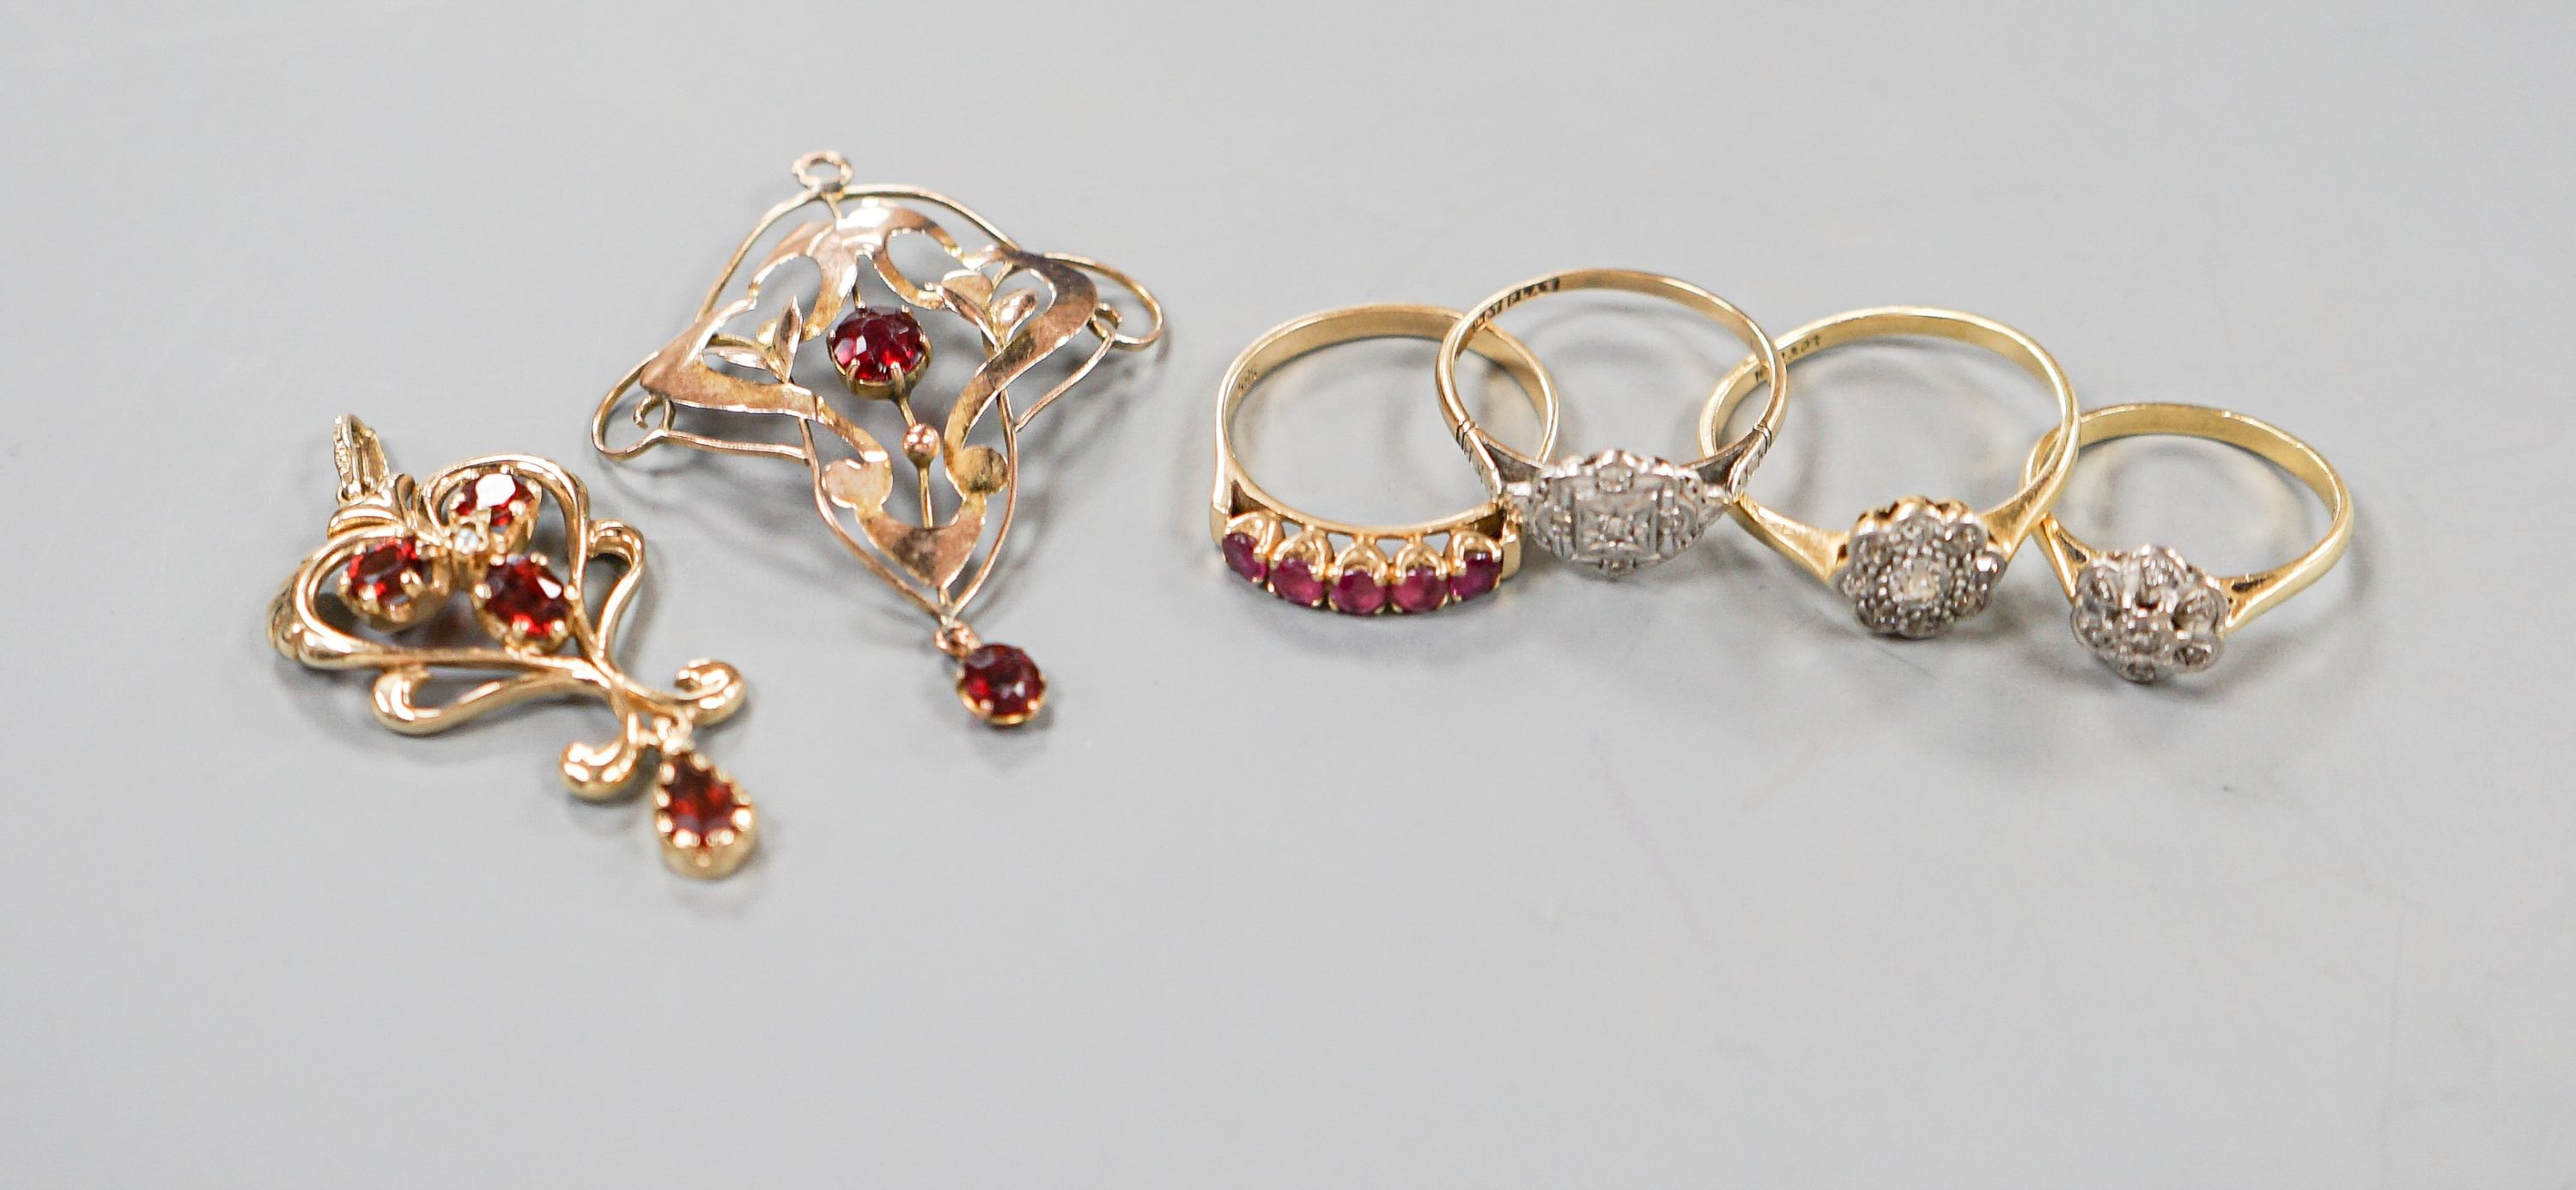 Two 18ct and diamond cluster rings, gross 5.3 grams, a 585 and diamond chip ring, gross 1.7 grams, a 9ct gold gem set ring and two 9ct pendants, gross 8.9 grams.